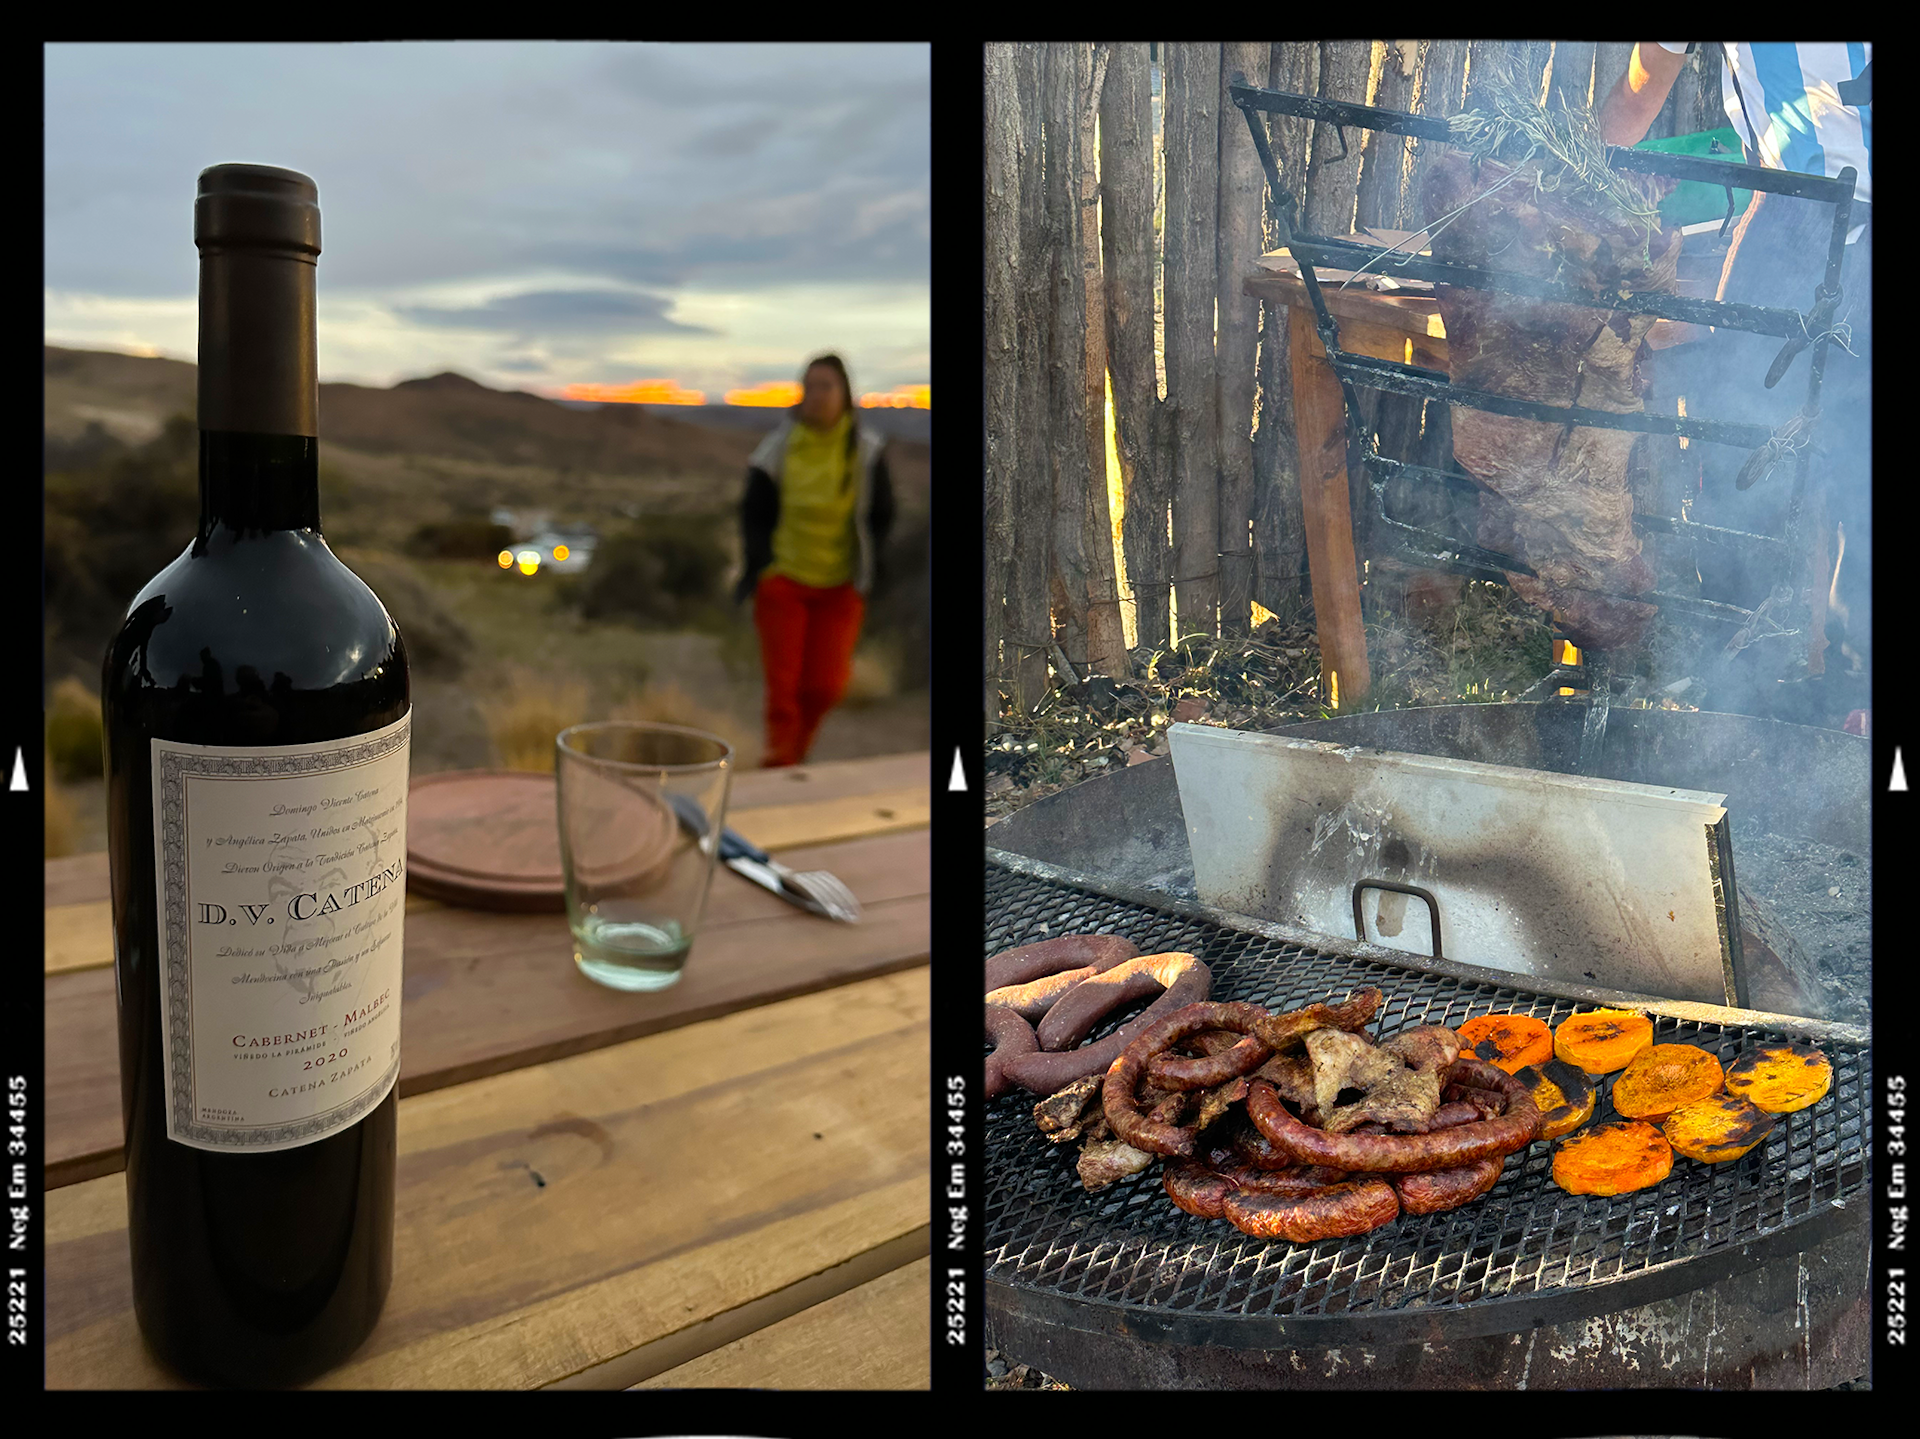 Wine and asado in Argentina